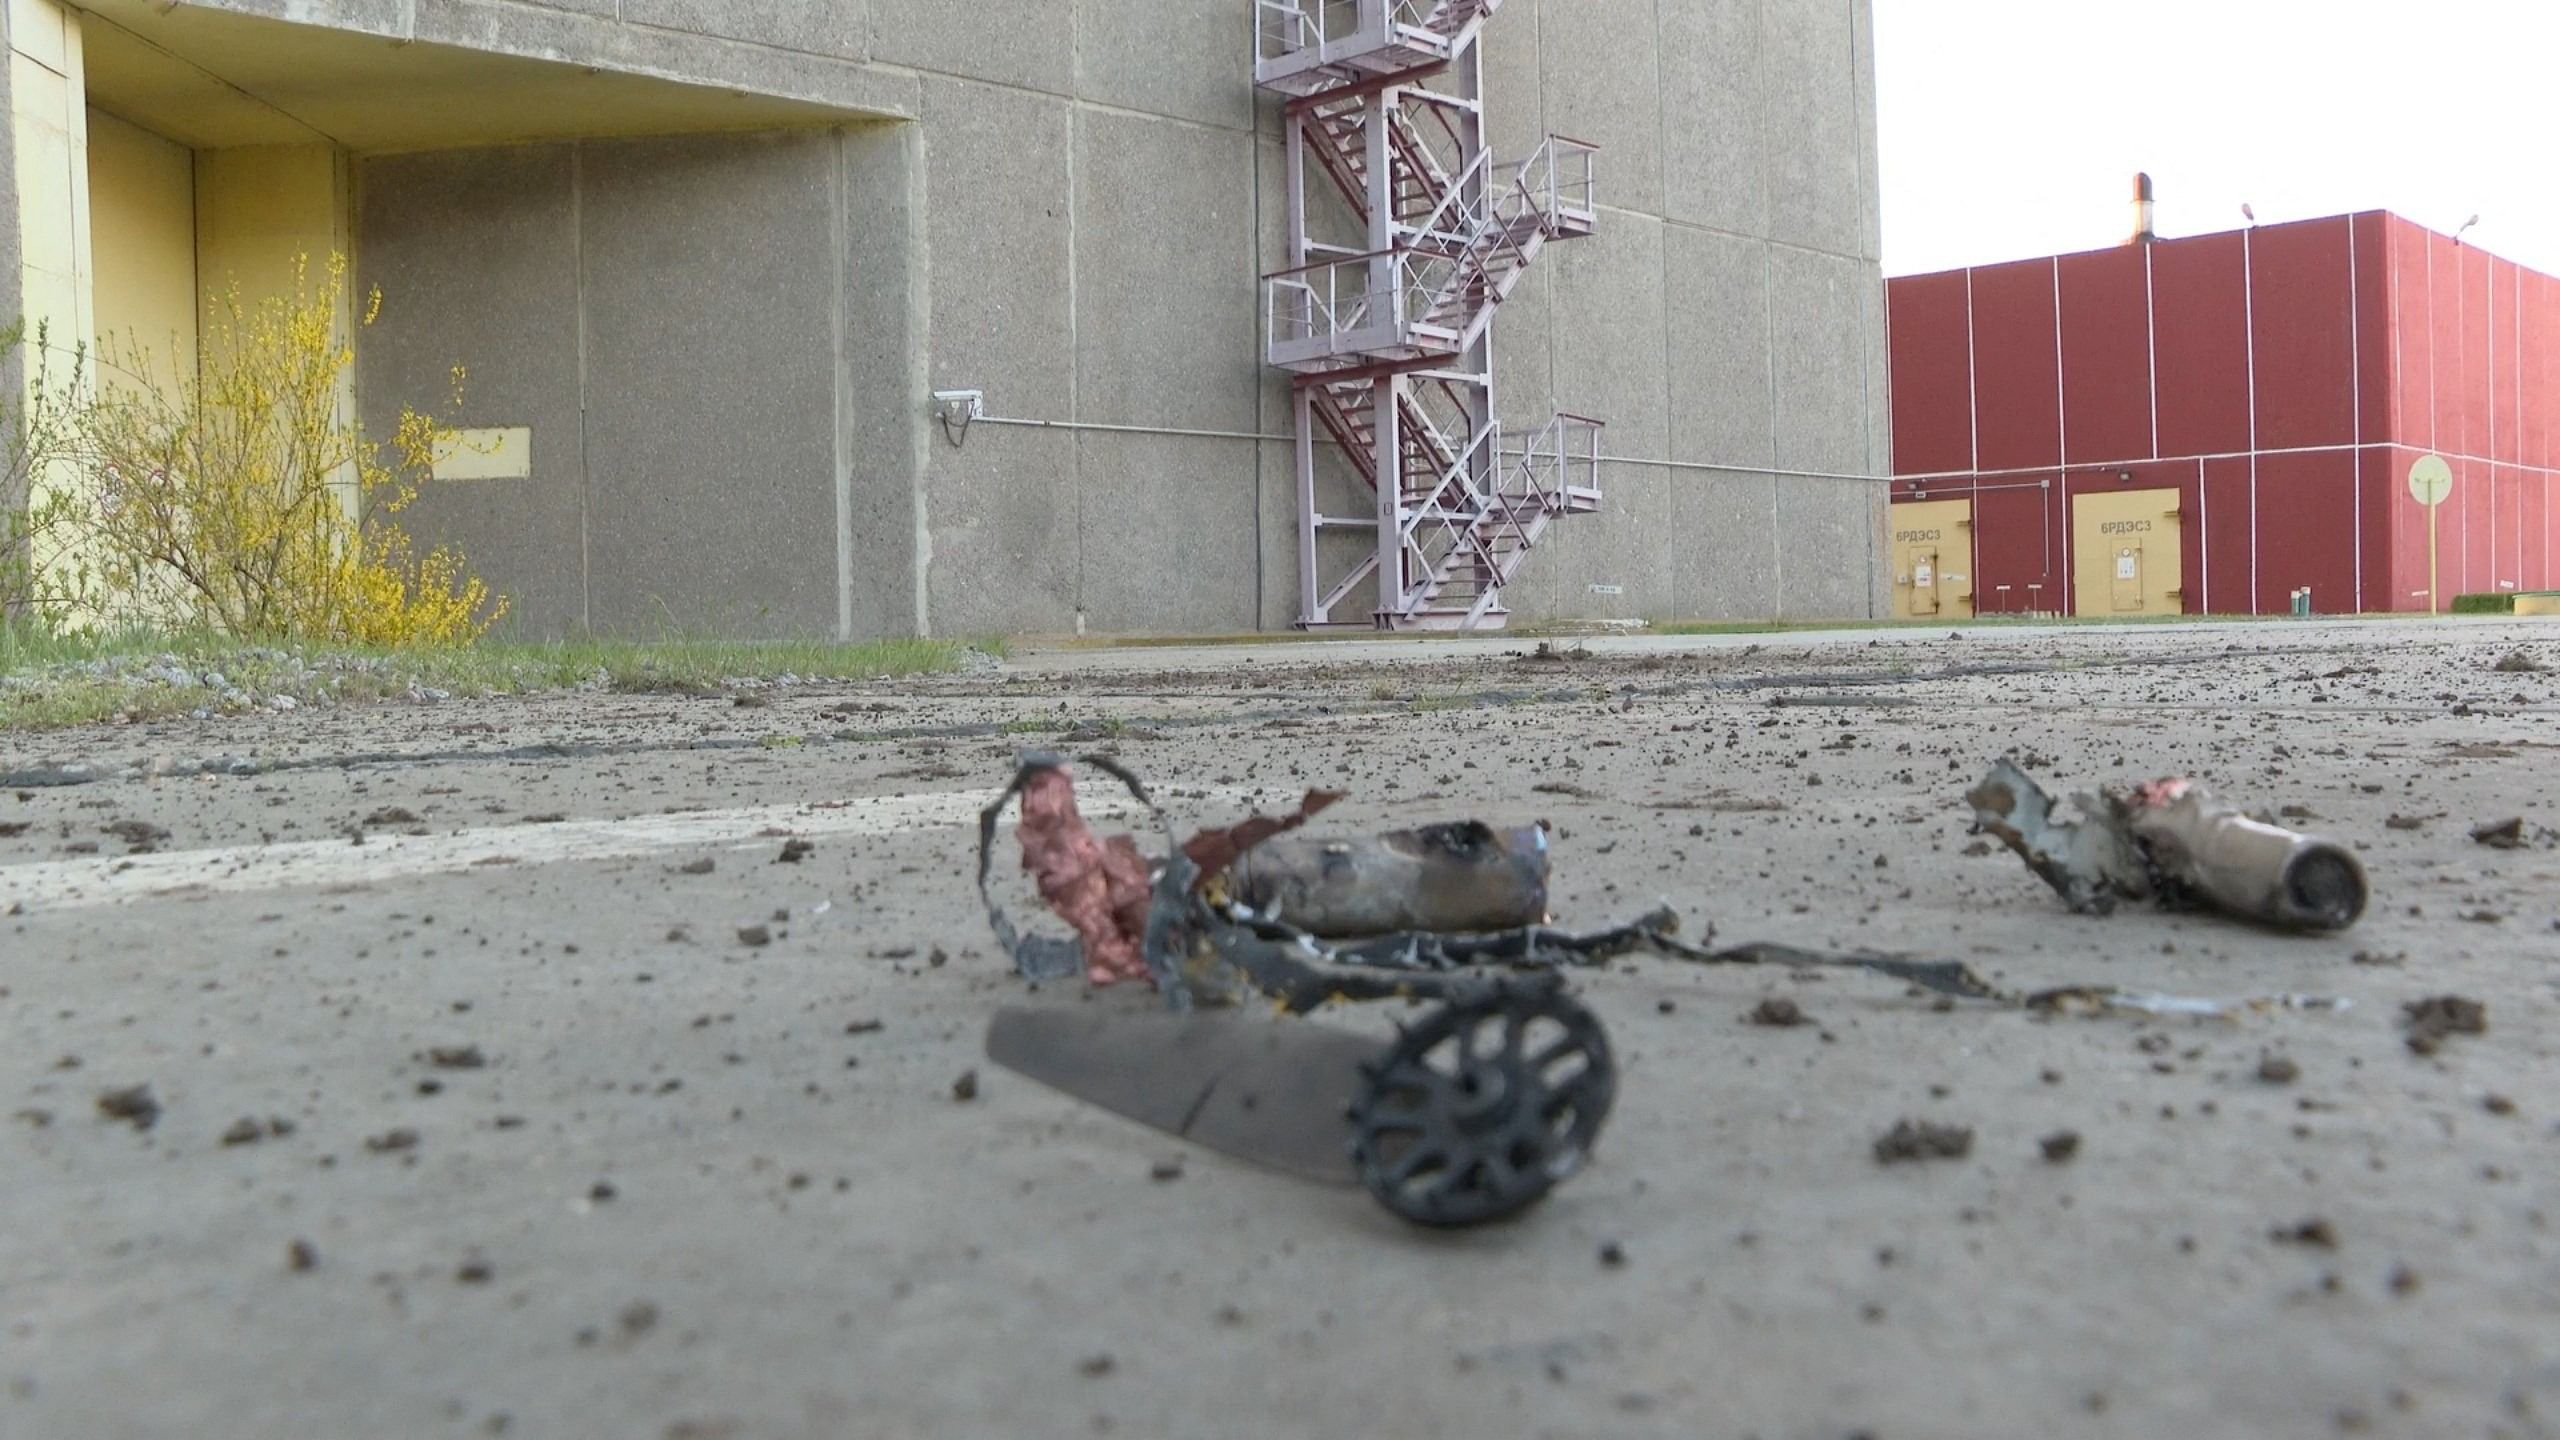 <div class="paragraphs"><p>A view shows the remains of what the Zaporizhzhia Nuclear Power Plant officials call a Ukrainian drone that was shot down over the station. Image for representation only.</p></div>